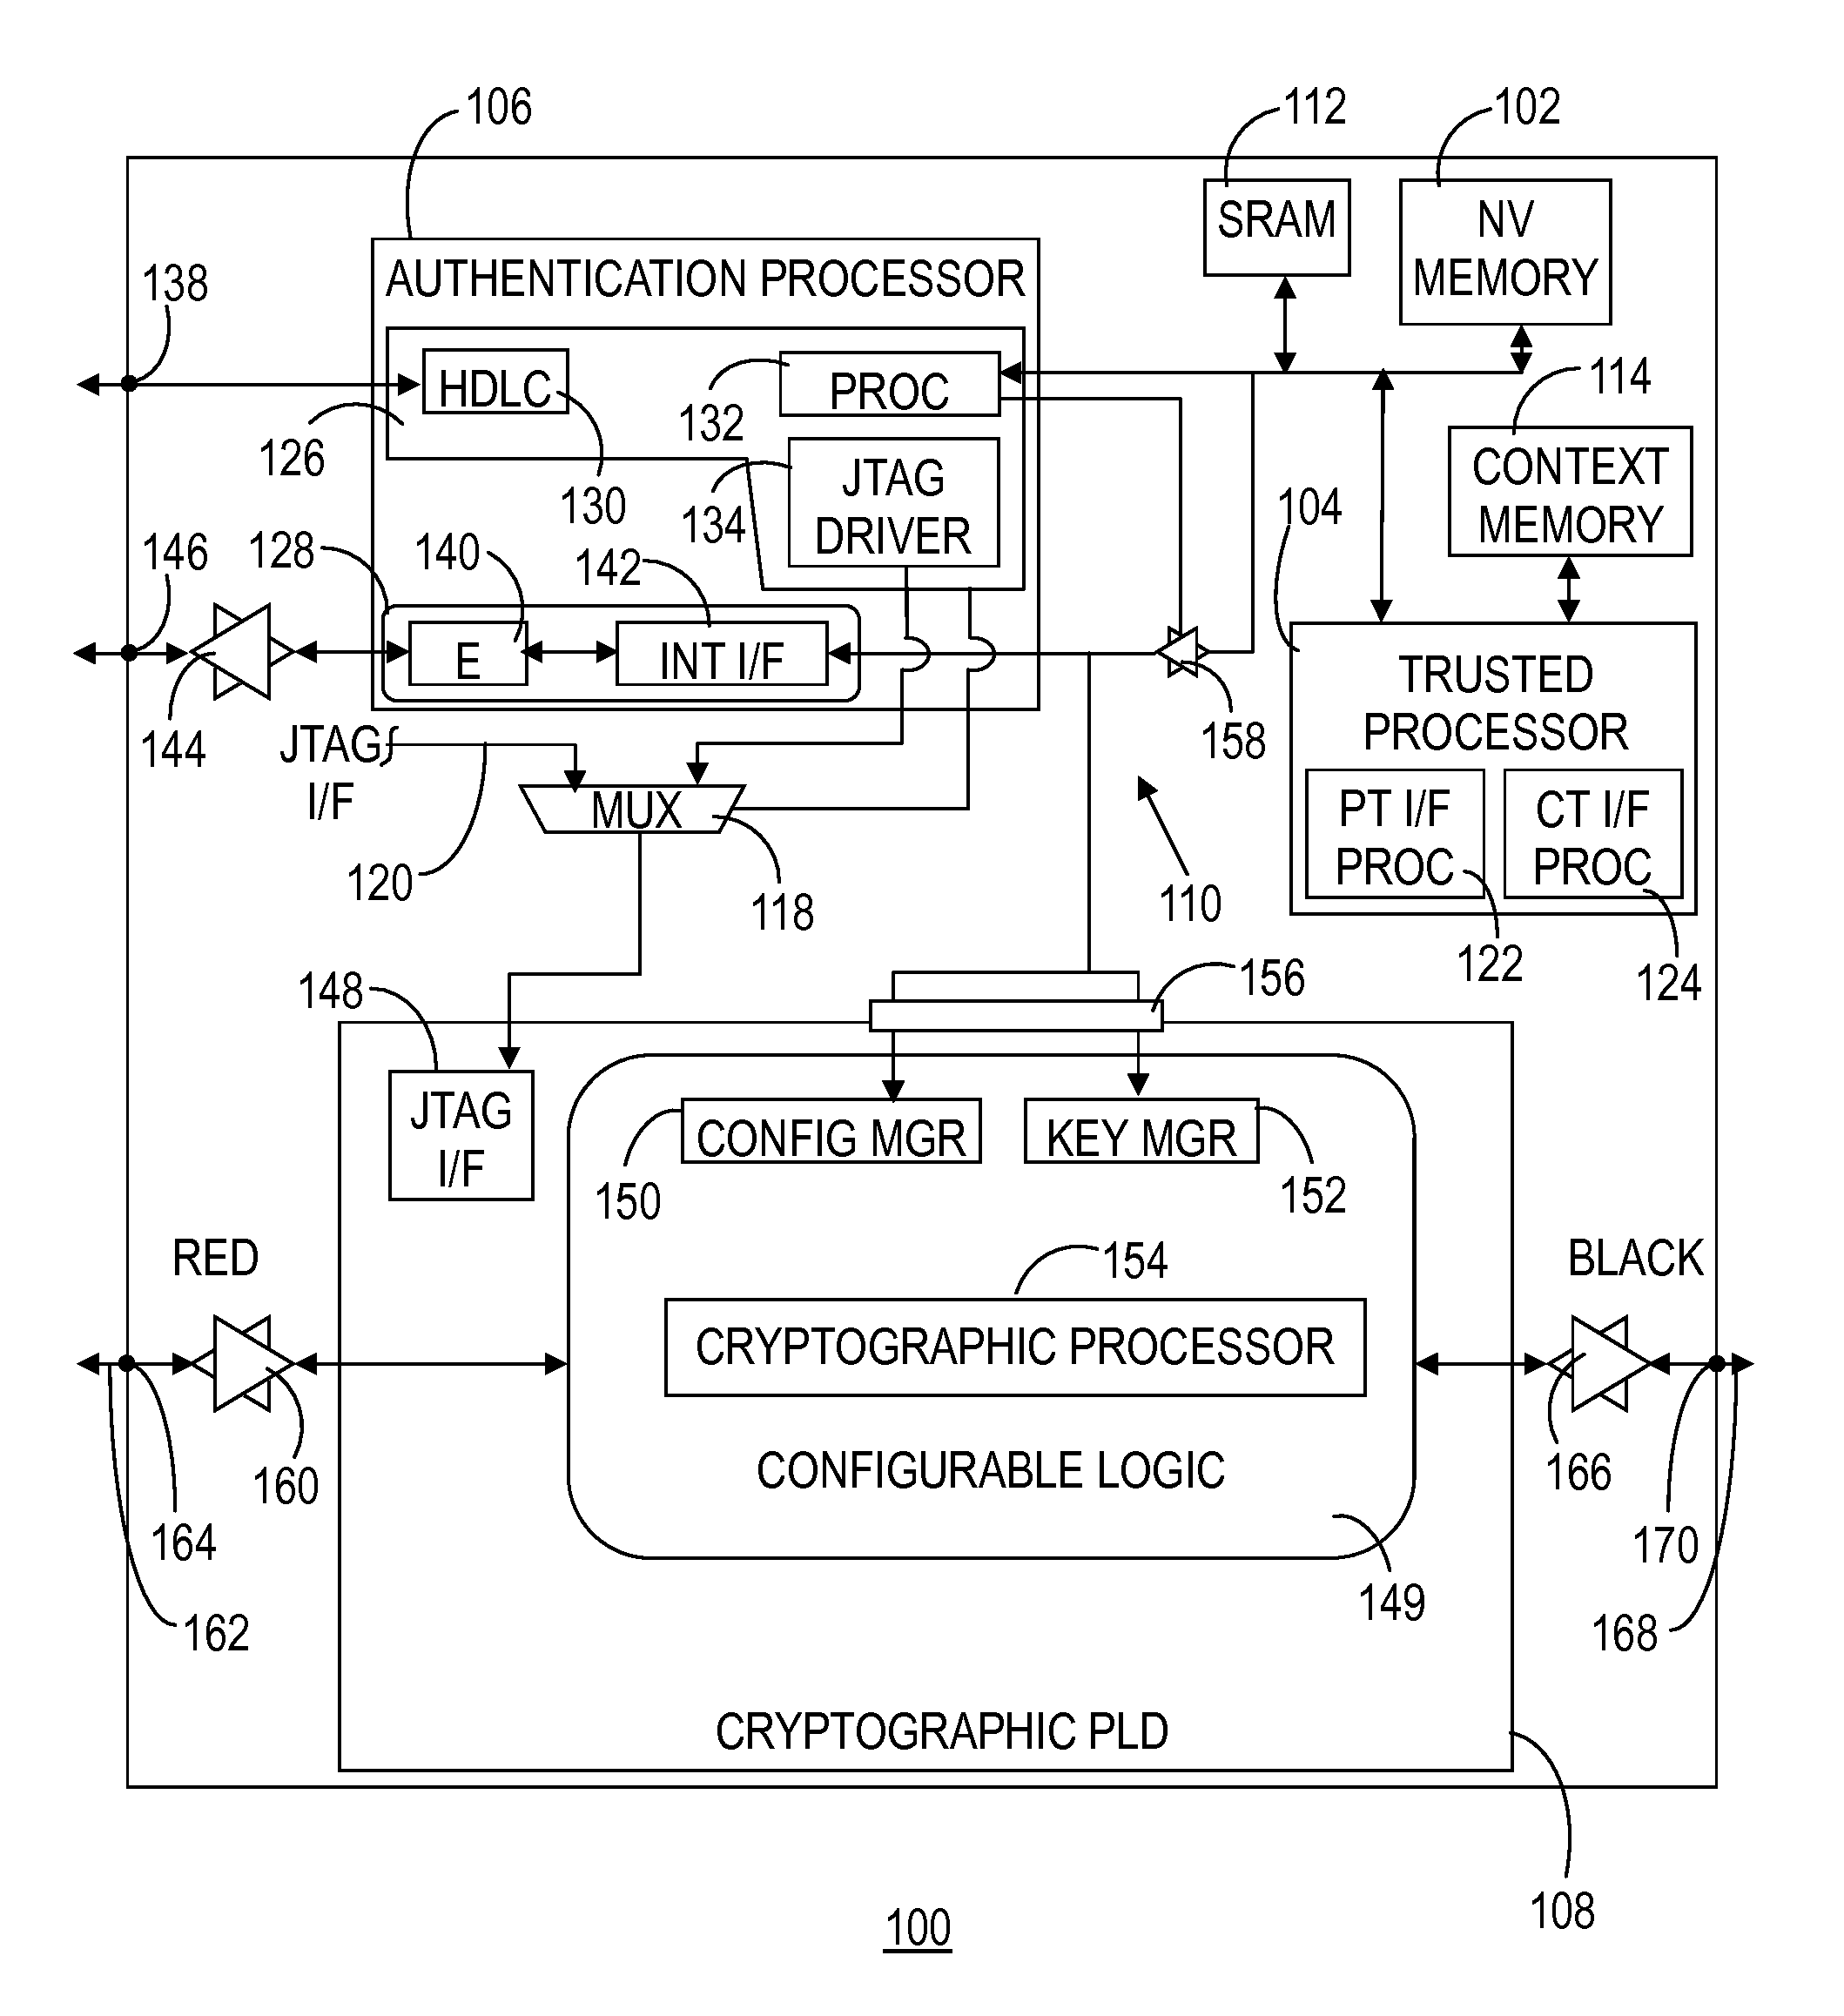 Secure configuration of programmable logic device